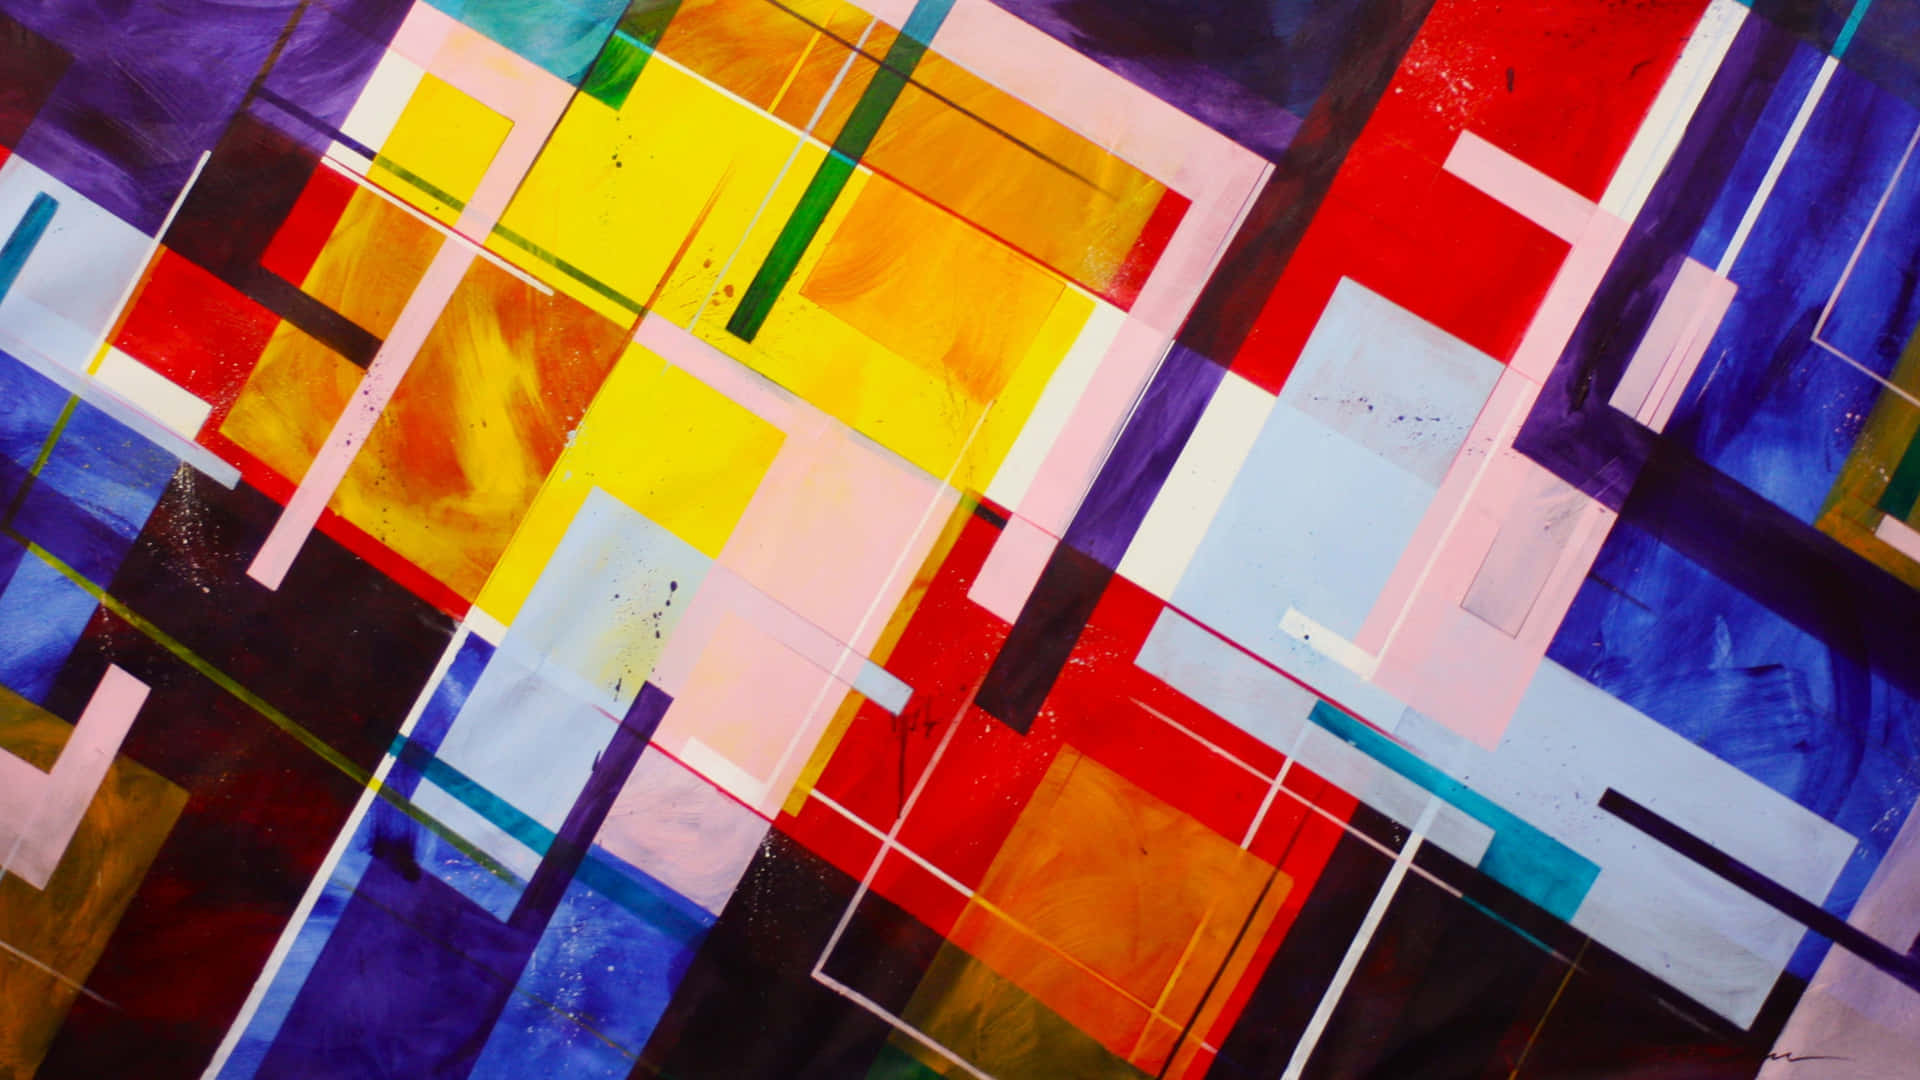 Squares And Lines In Colorful Abstract Art